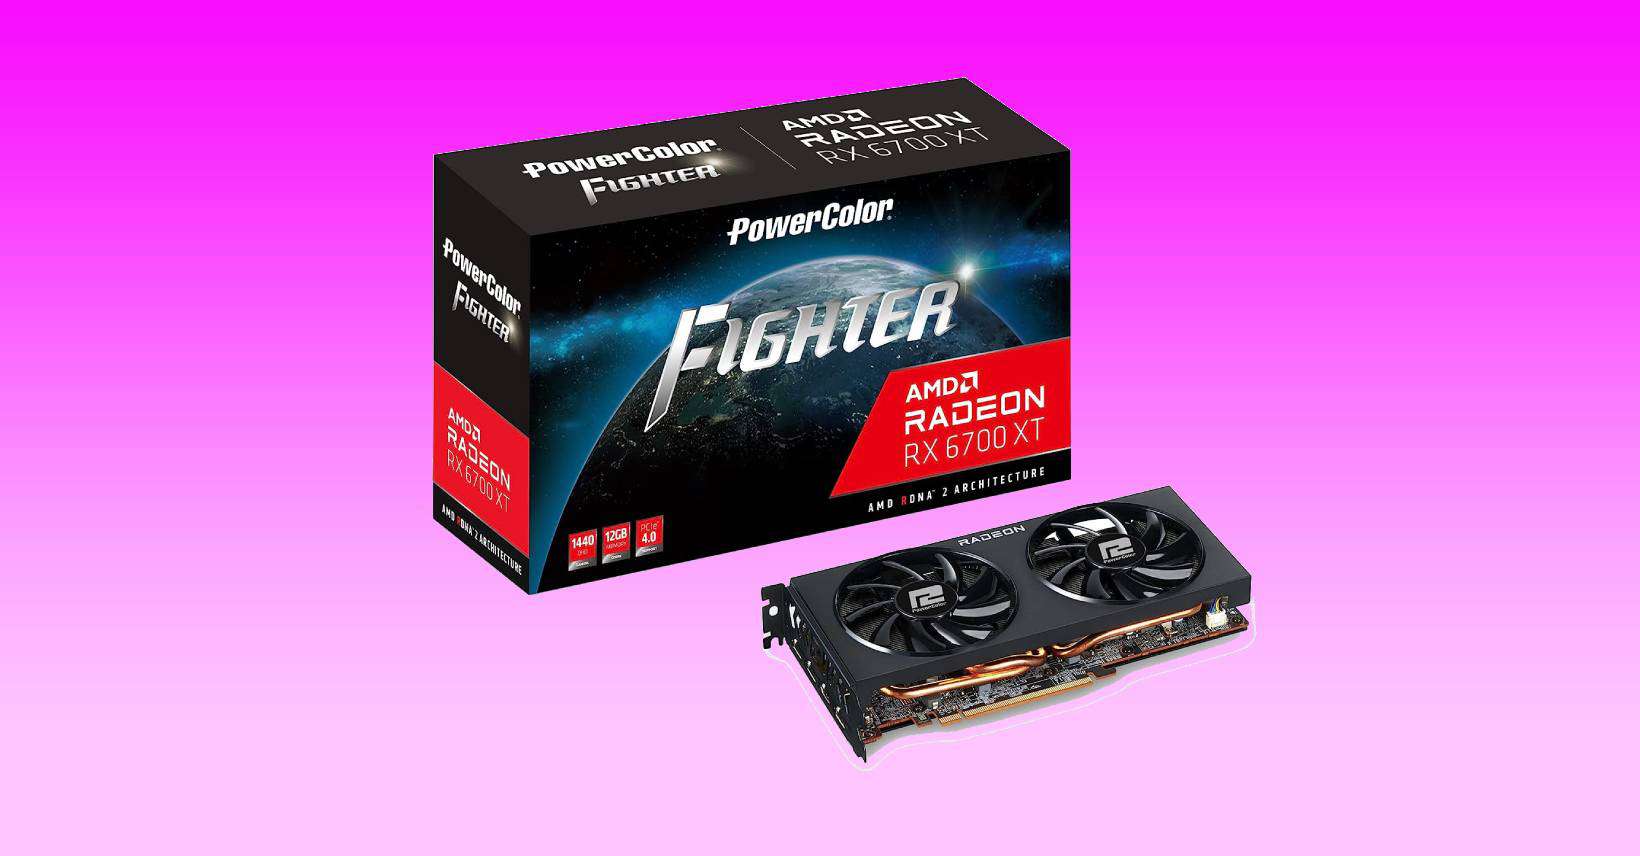 Save $70 on this PowerColor Fighter RX 6700 XT GPU – Prime Day Deal